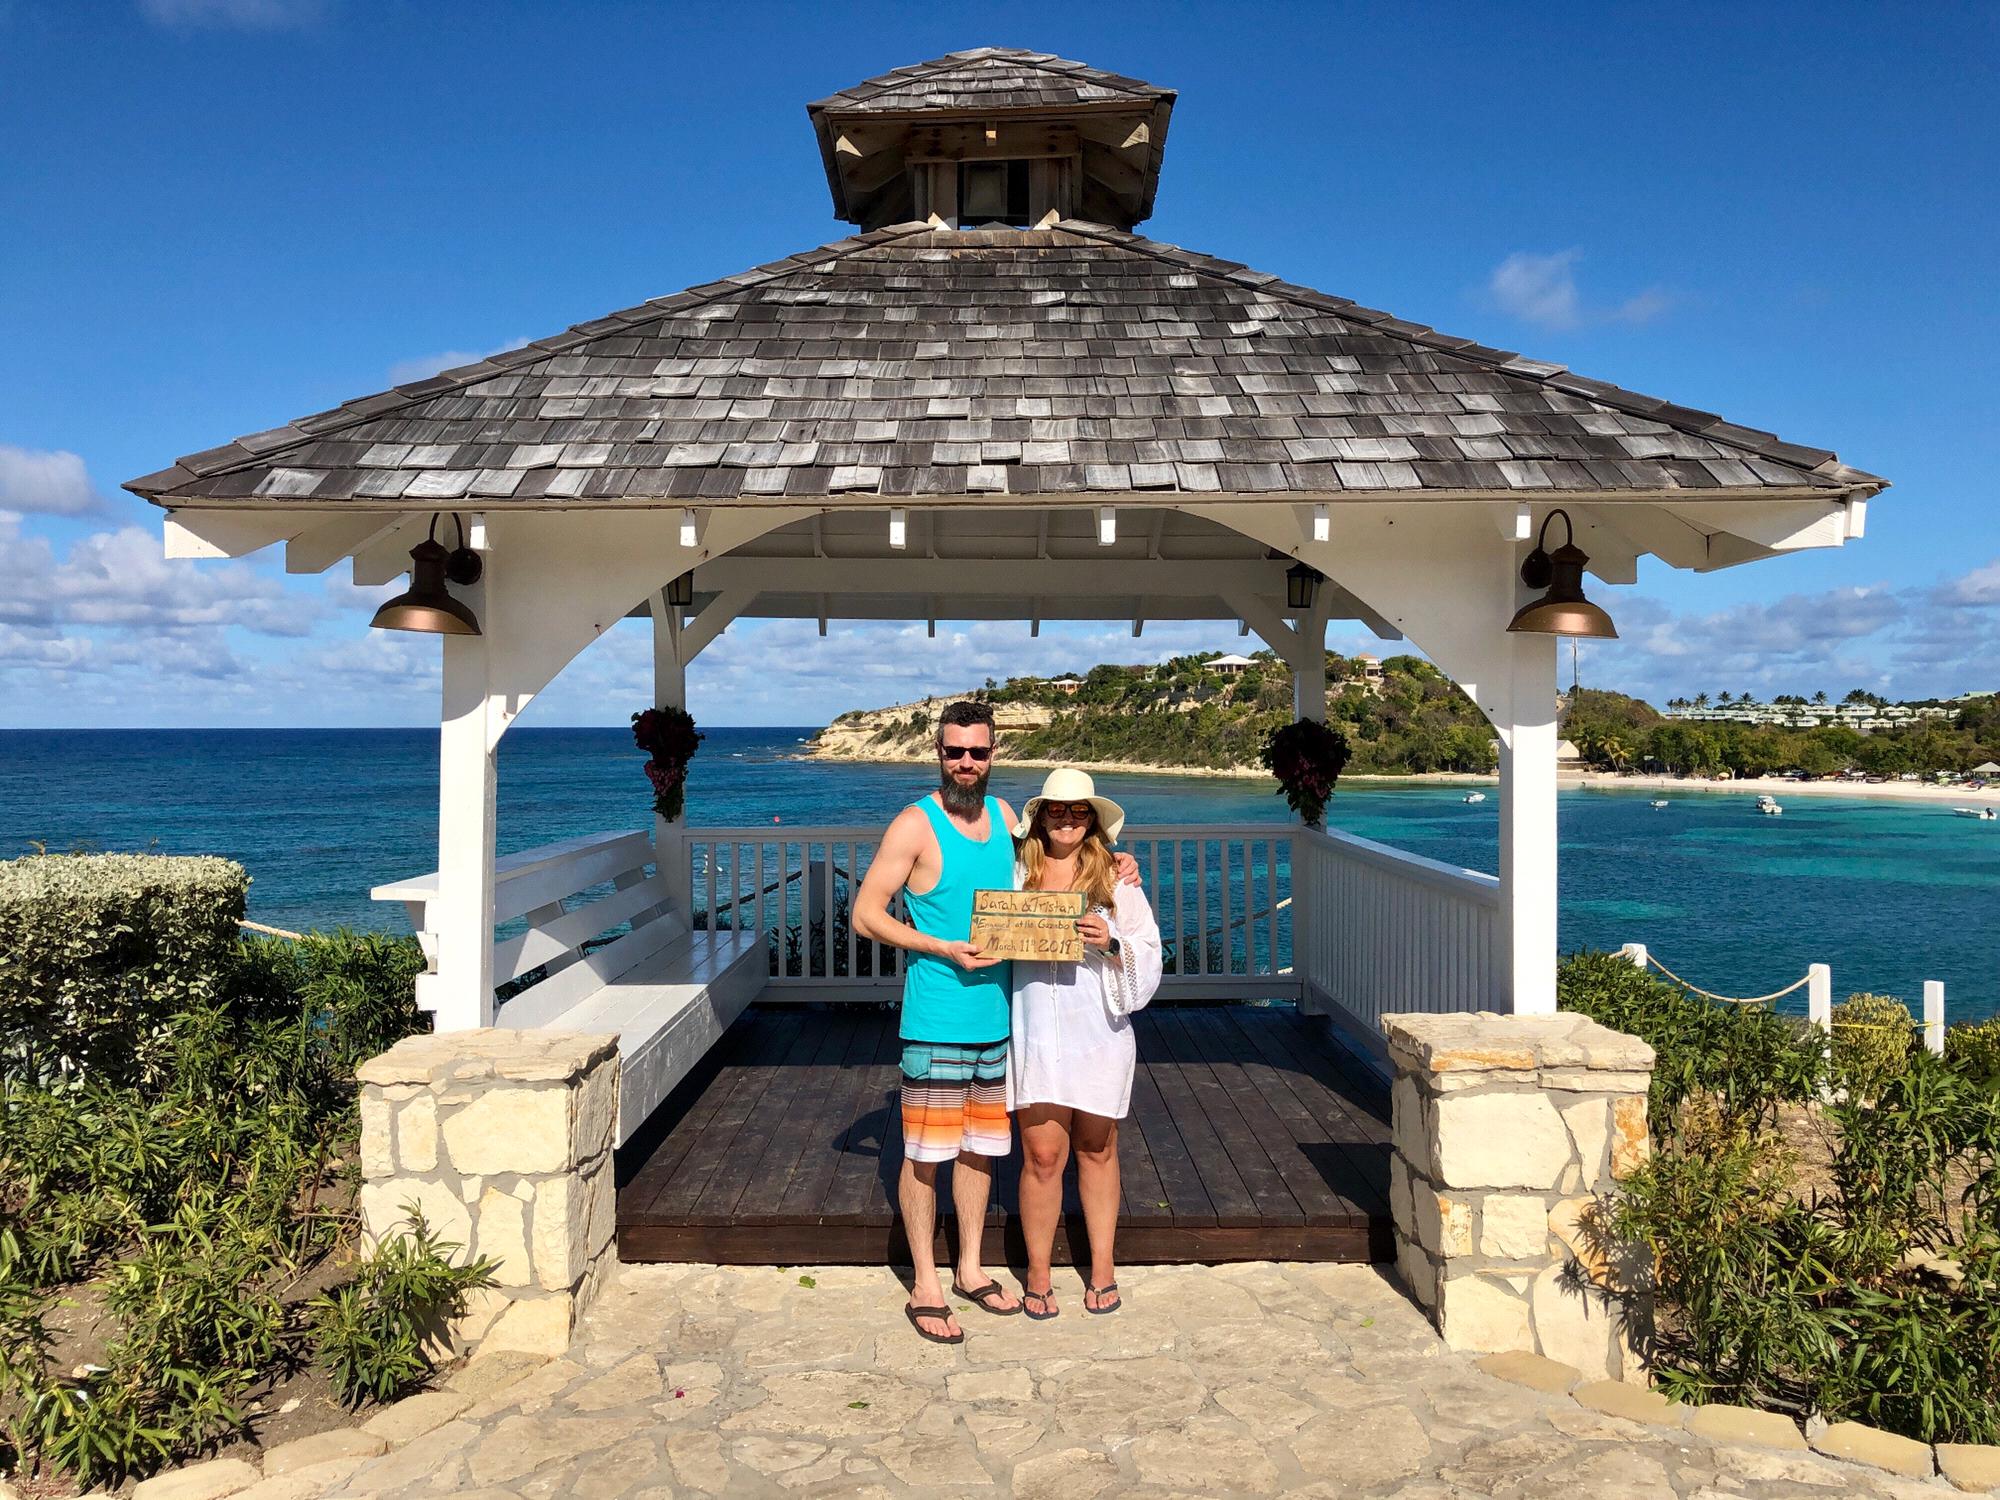 The gazebo where we got engaged in Antigua - March 2019